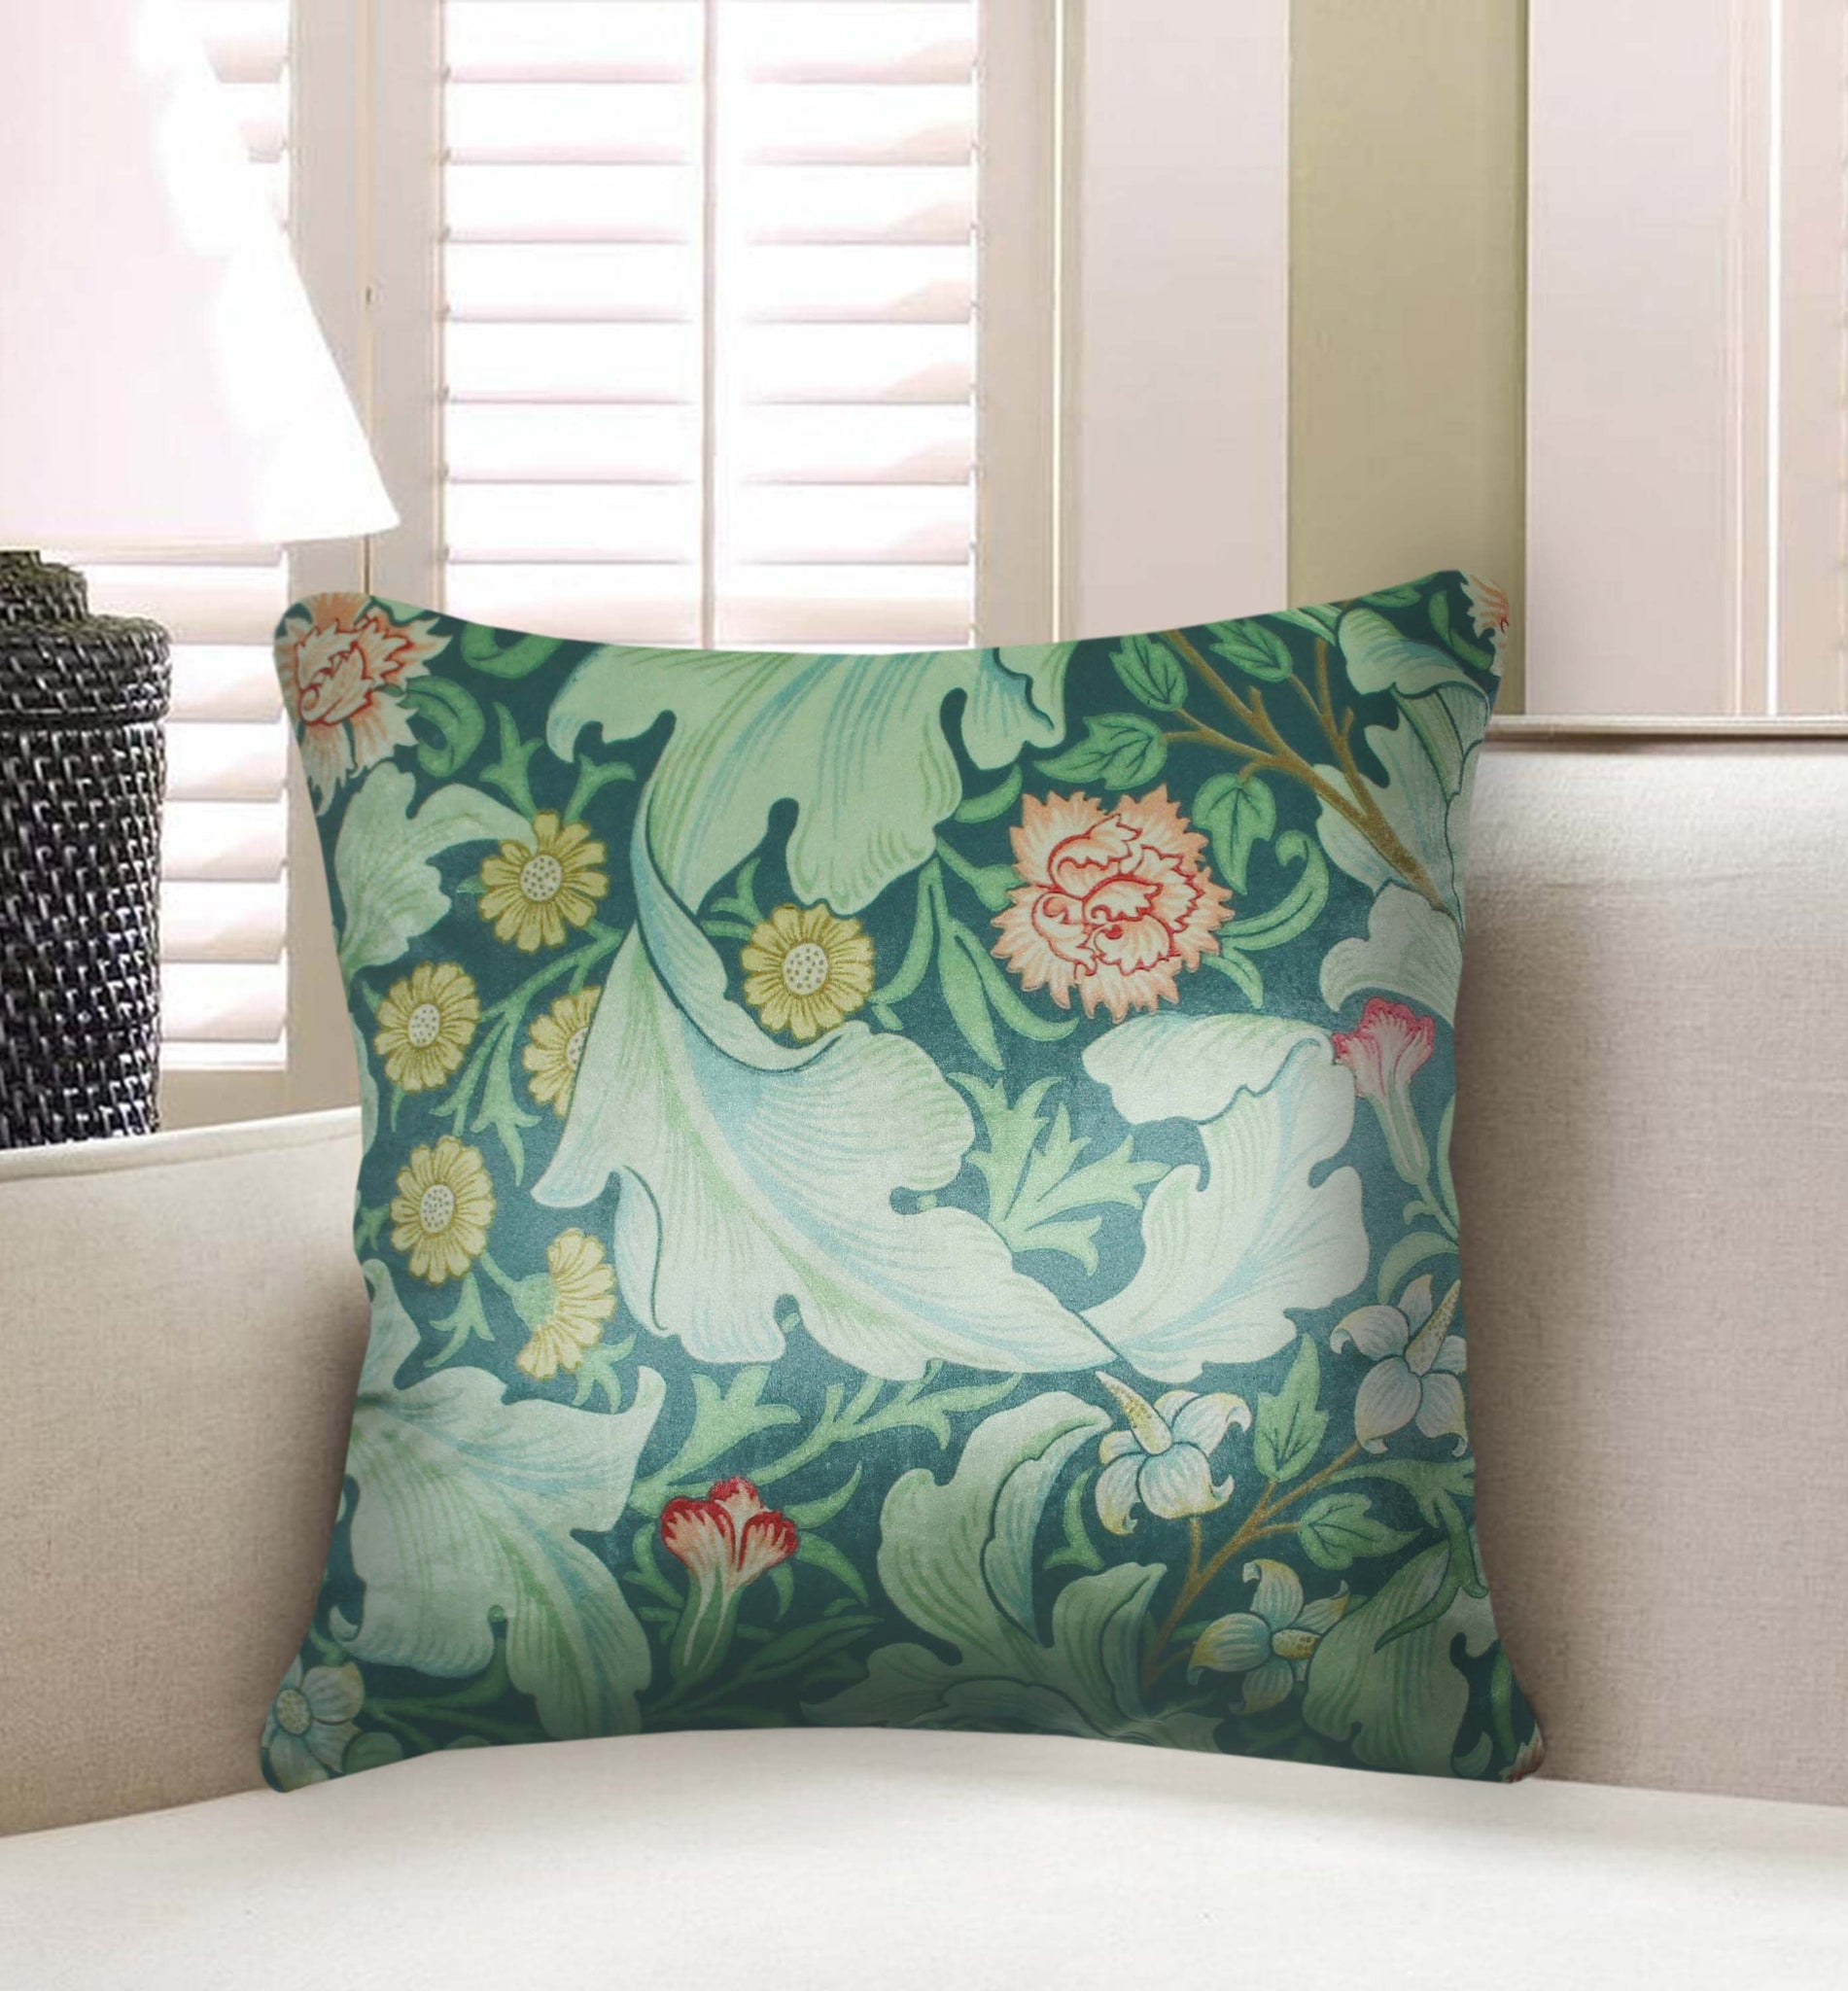 Green Velvet Cushion Cover William Morris Floral Decorative Pillowcase Vintage Home Décor Throw Pillow for Sofa Chair Couch Bedroom 45x45 cm 18x18 In